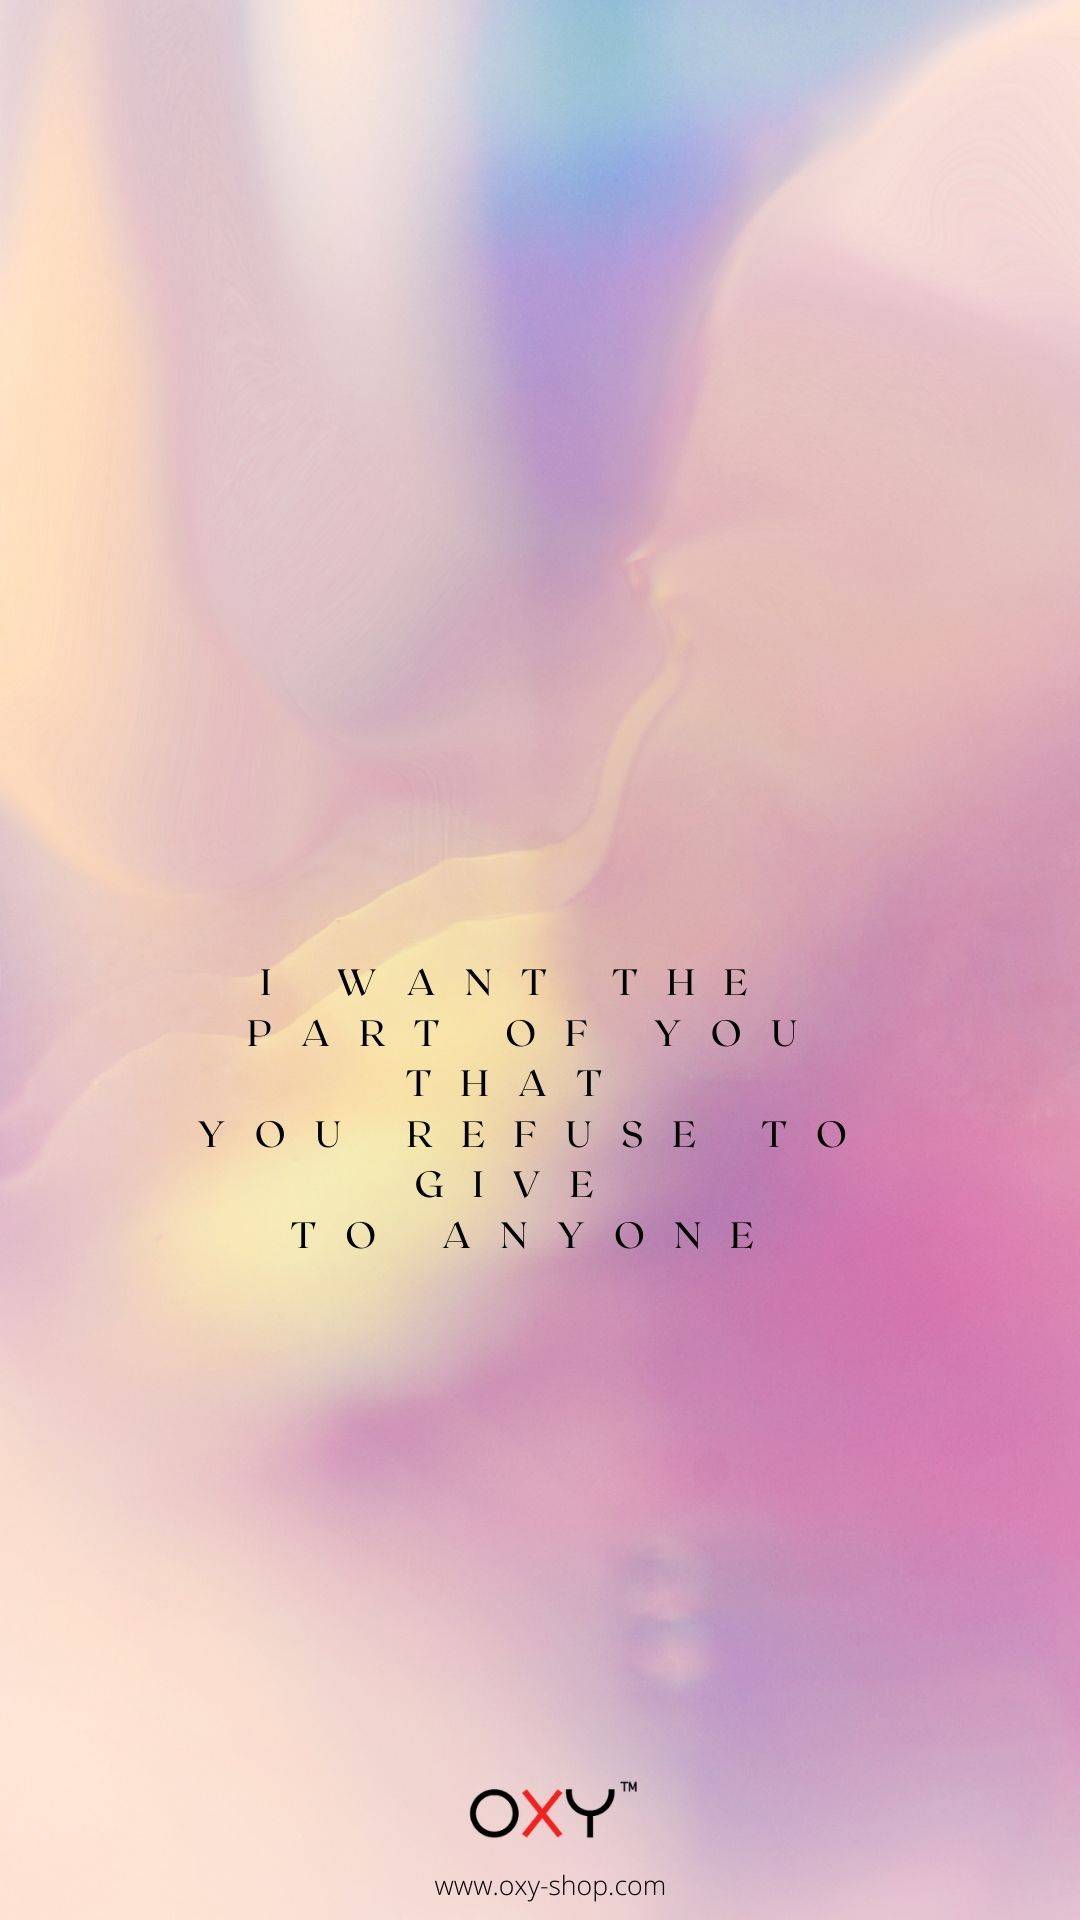 I want the part of you that you refuse to give to anyone. - BDSM wallpaper